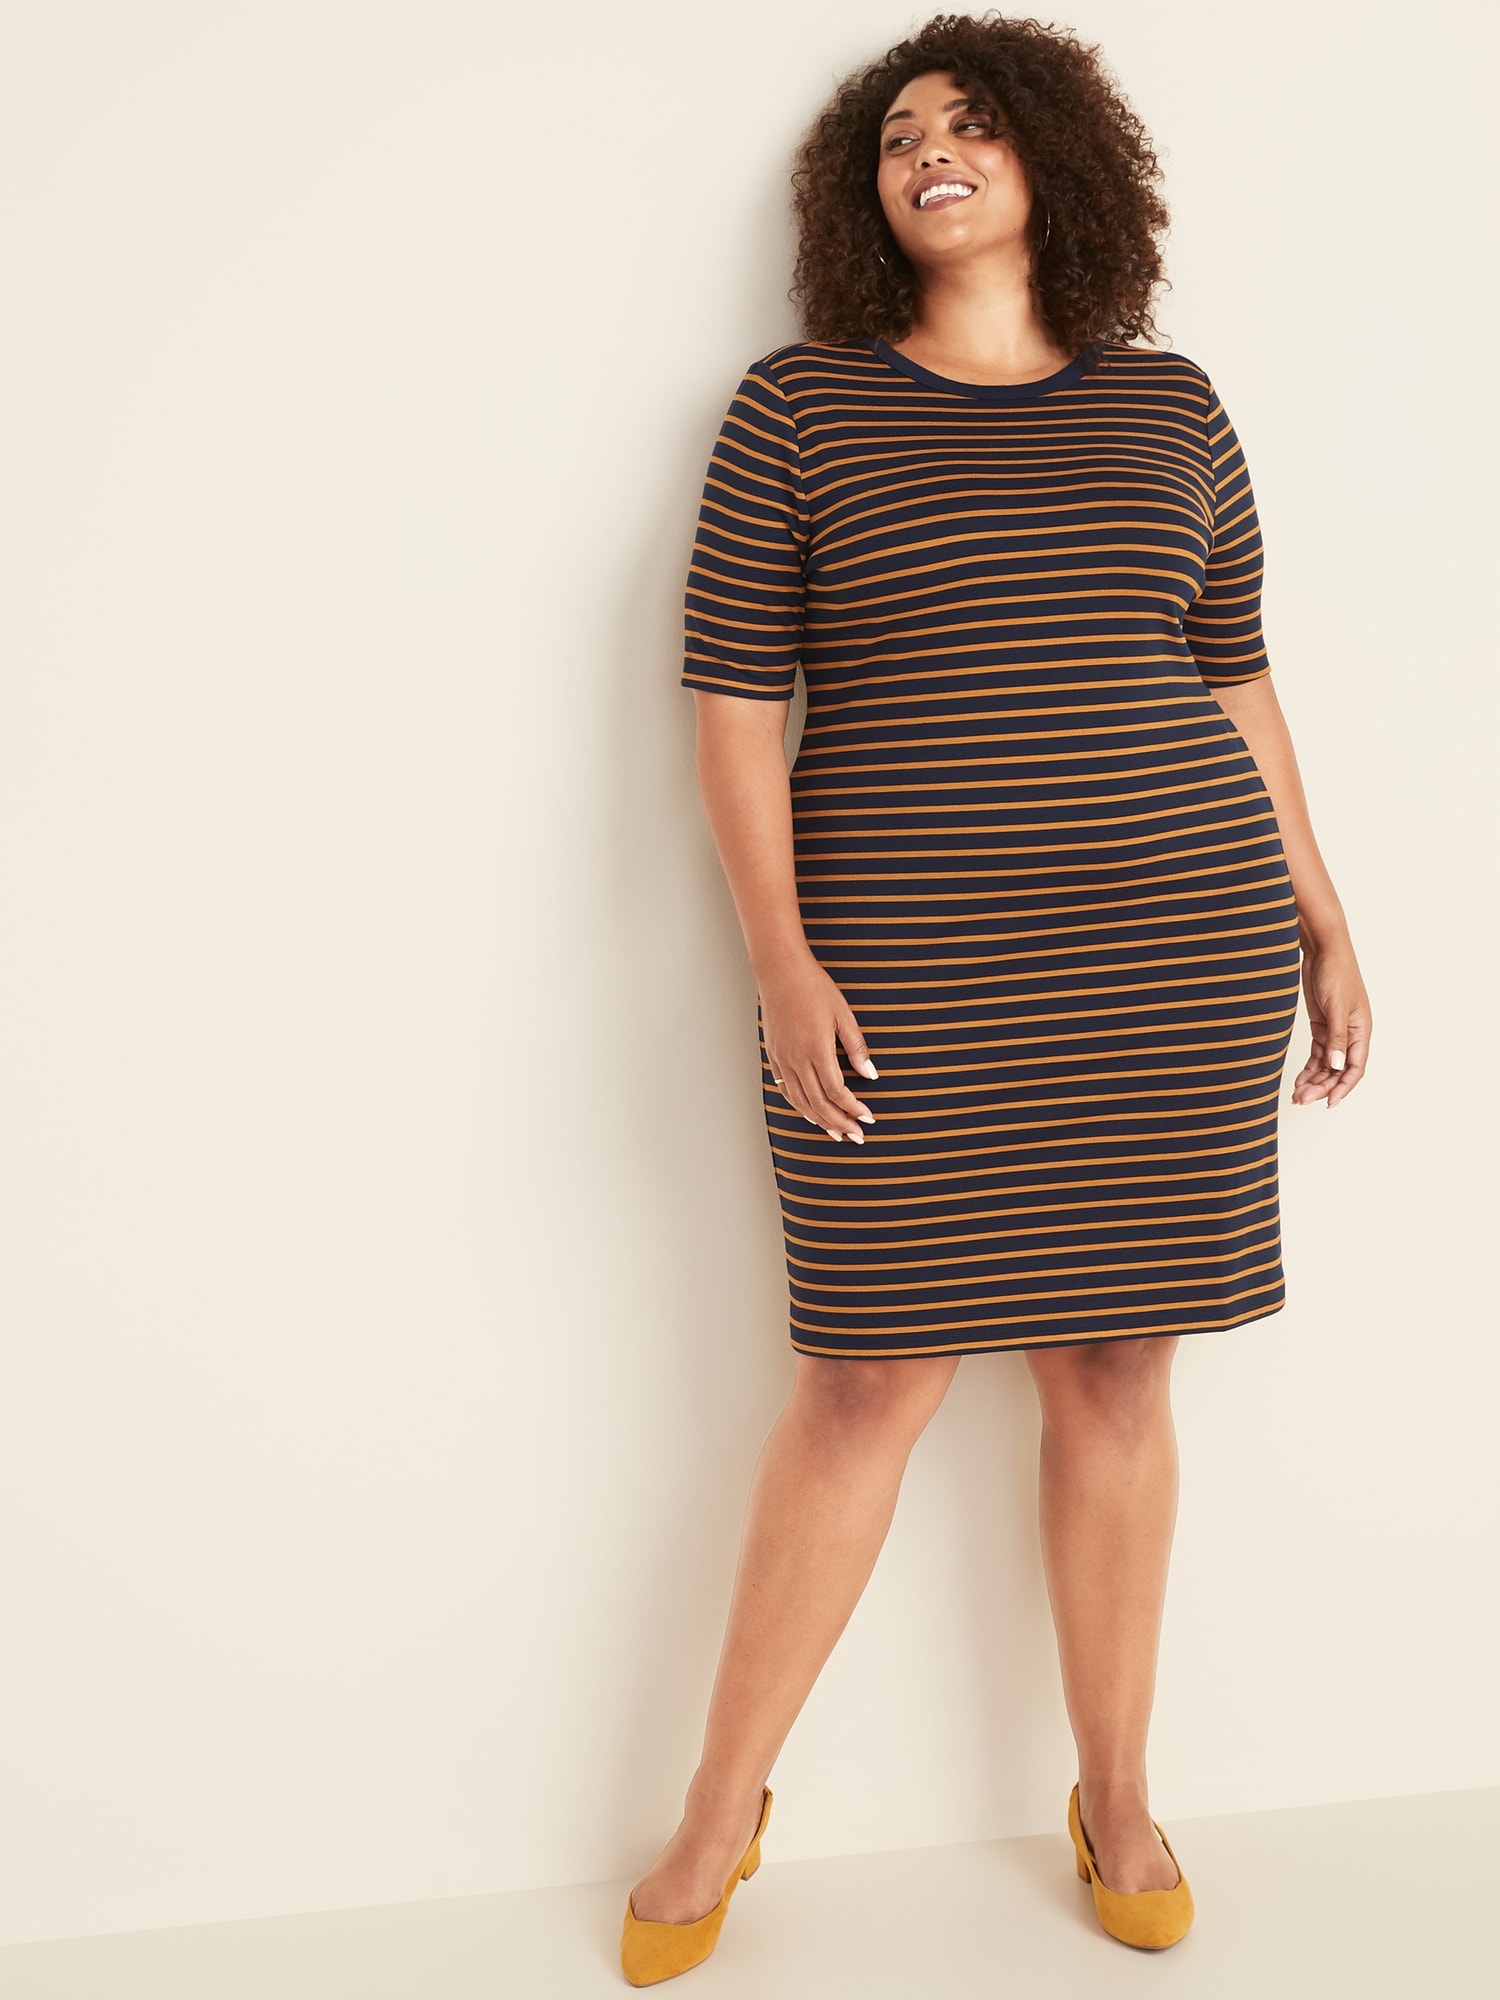 Fitted PlusSize JerseyKnit Tee Dress Old Navy